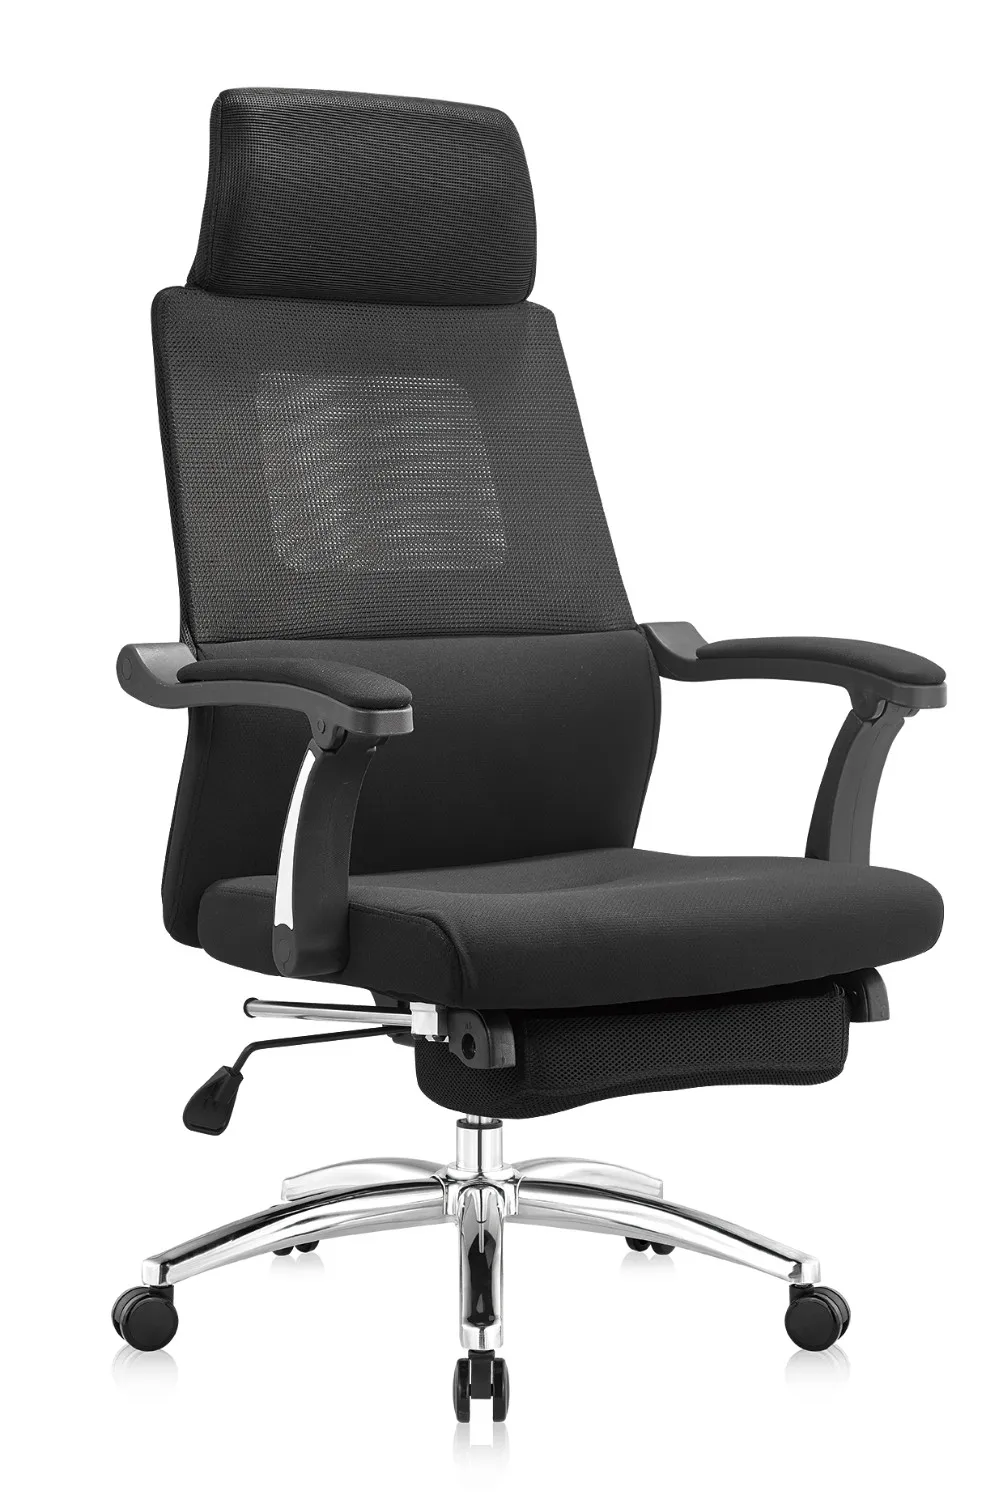 reclining mesh office chair with footrest for 180 degree sleeping  buy  executive reclining office chairmesh chair with footrest180 degree  sleeping